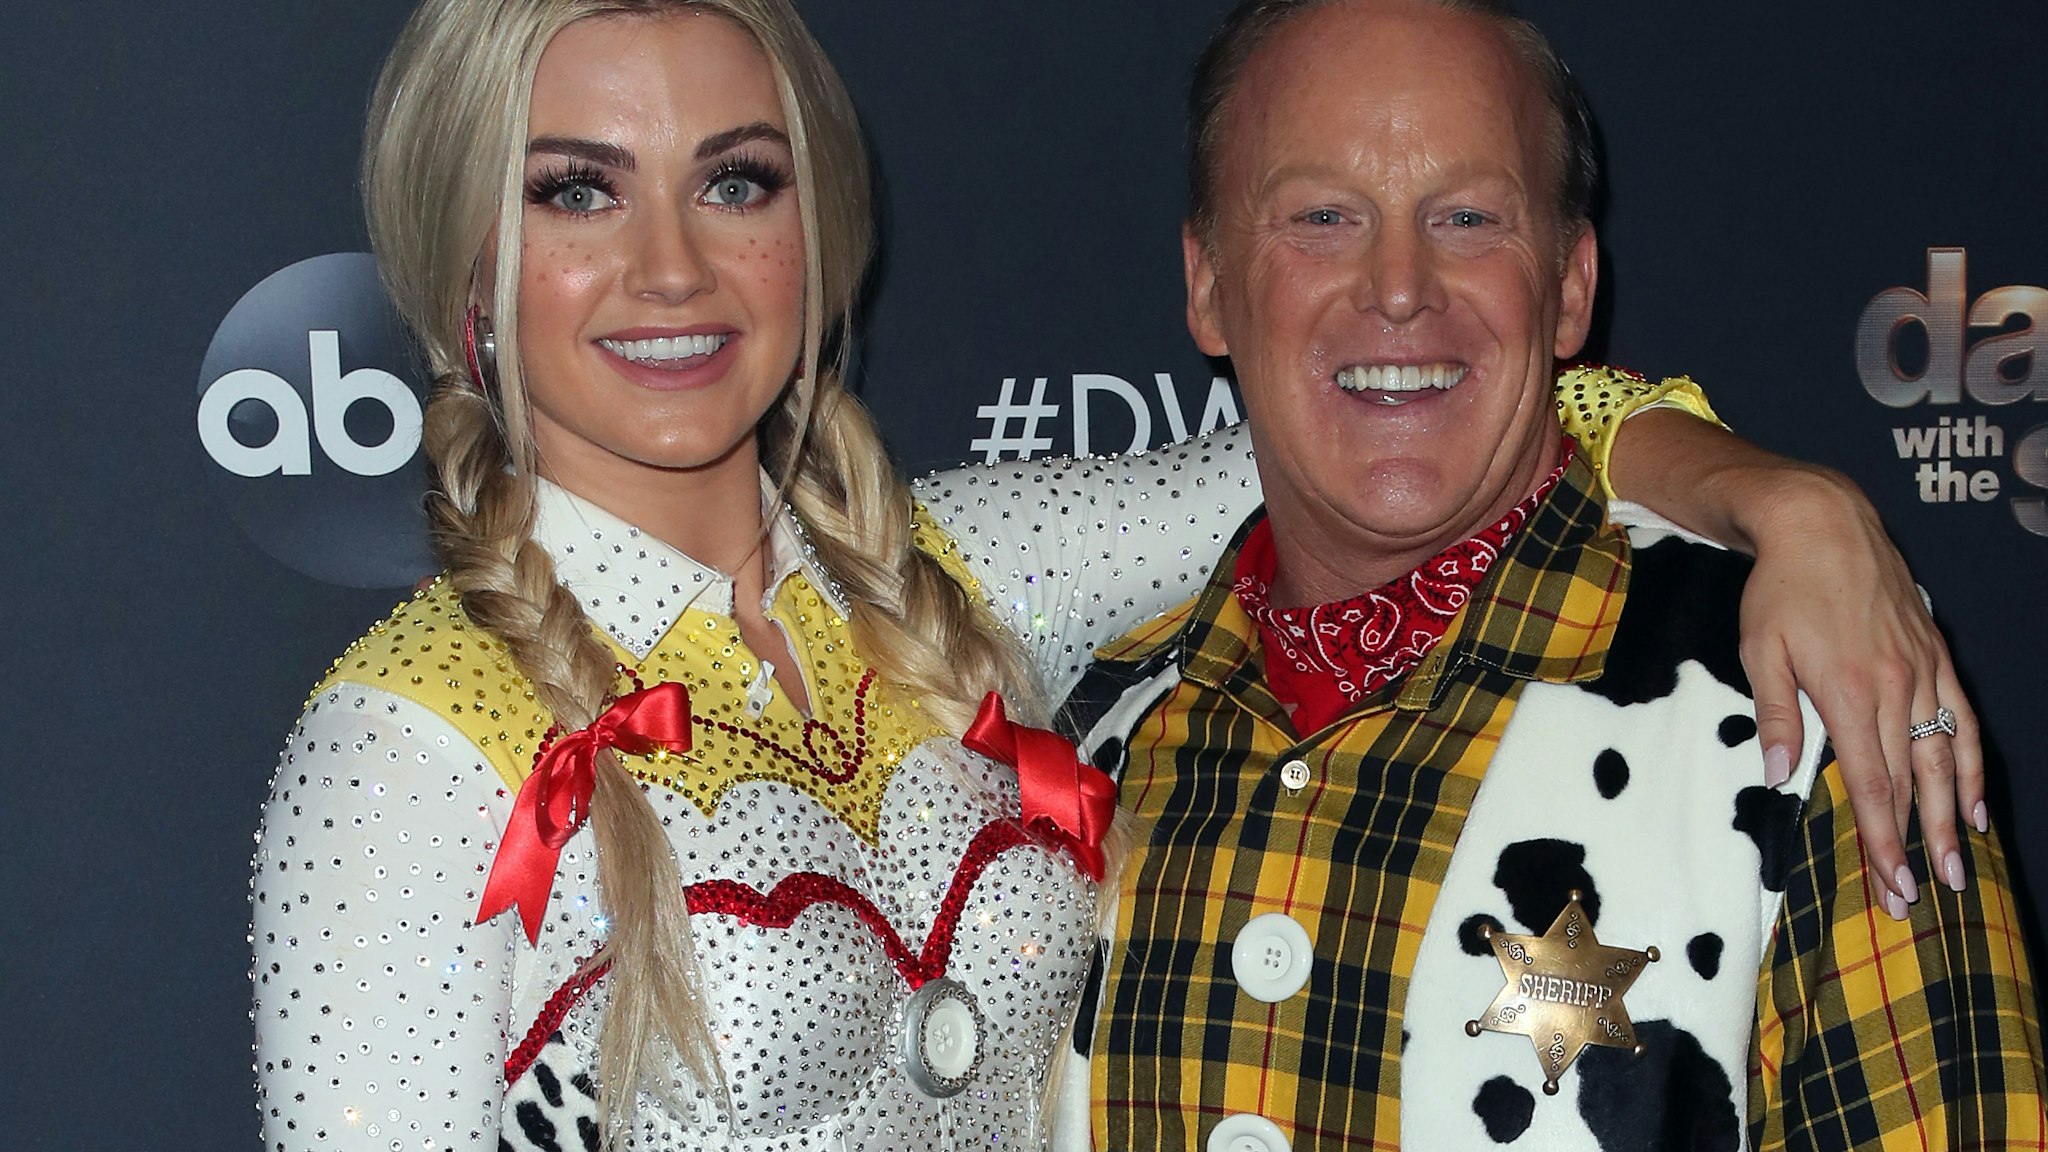 LOS ANGELES, CALIFORNIA - OCTOBER 14: Lindsay Arnold and Sean Spicer pose at "Dancing with the Stars" Season 28 at CBS Television City on October 14, 2019 in Los Angeles, California. (Photo by David Livingston/Getty Images)